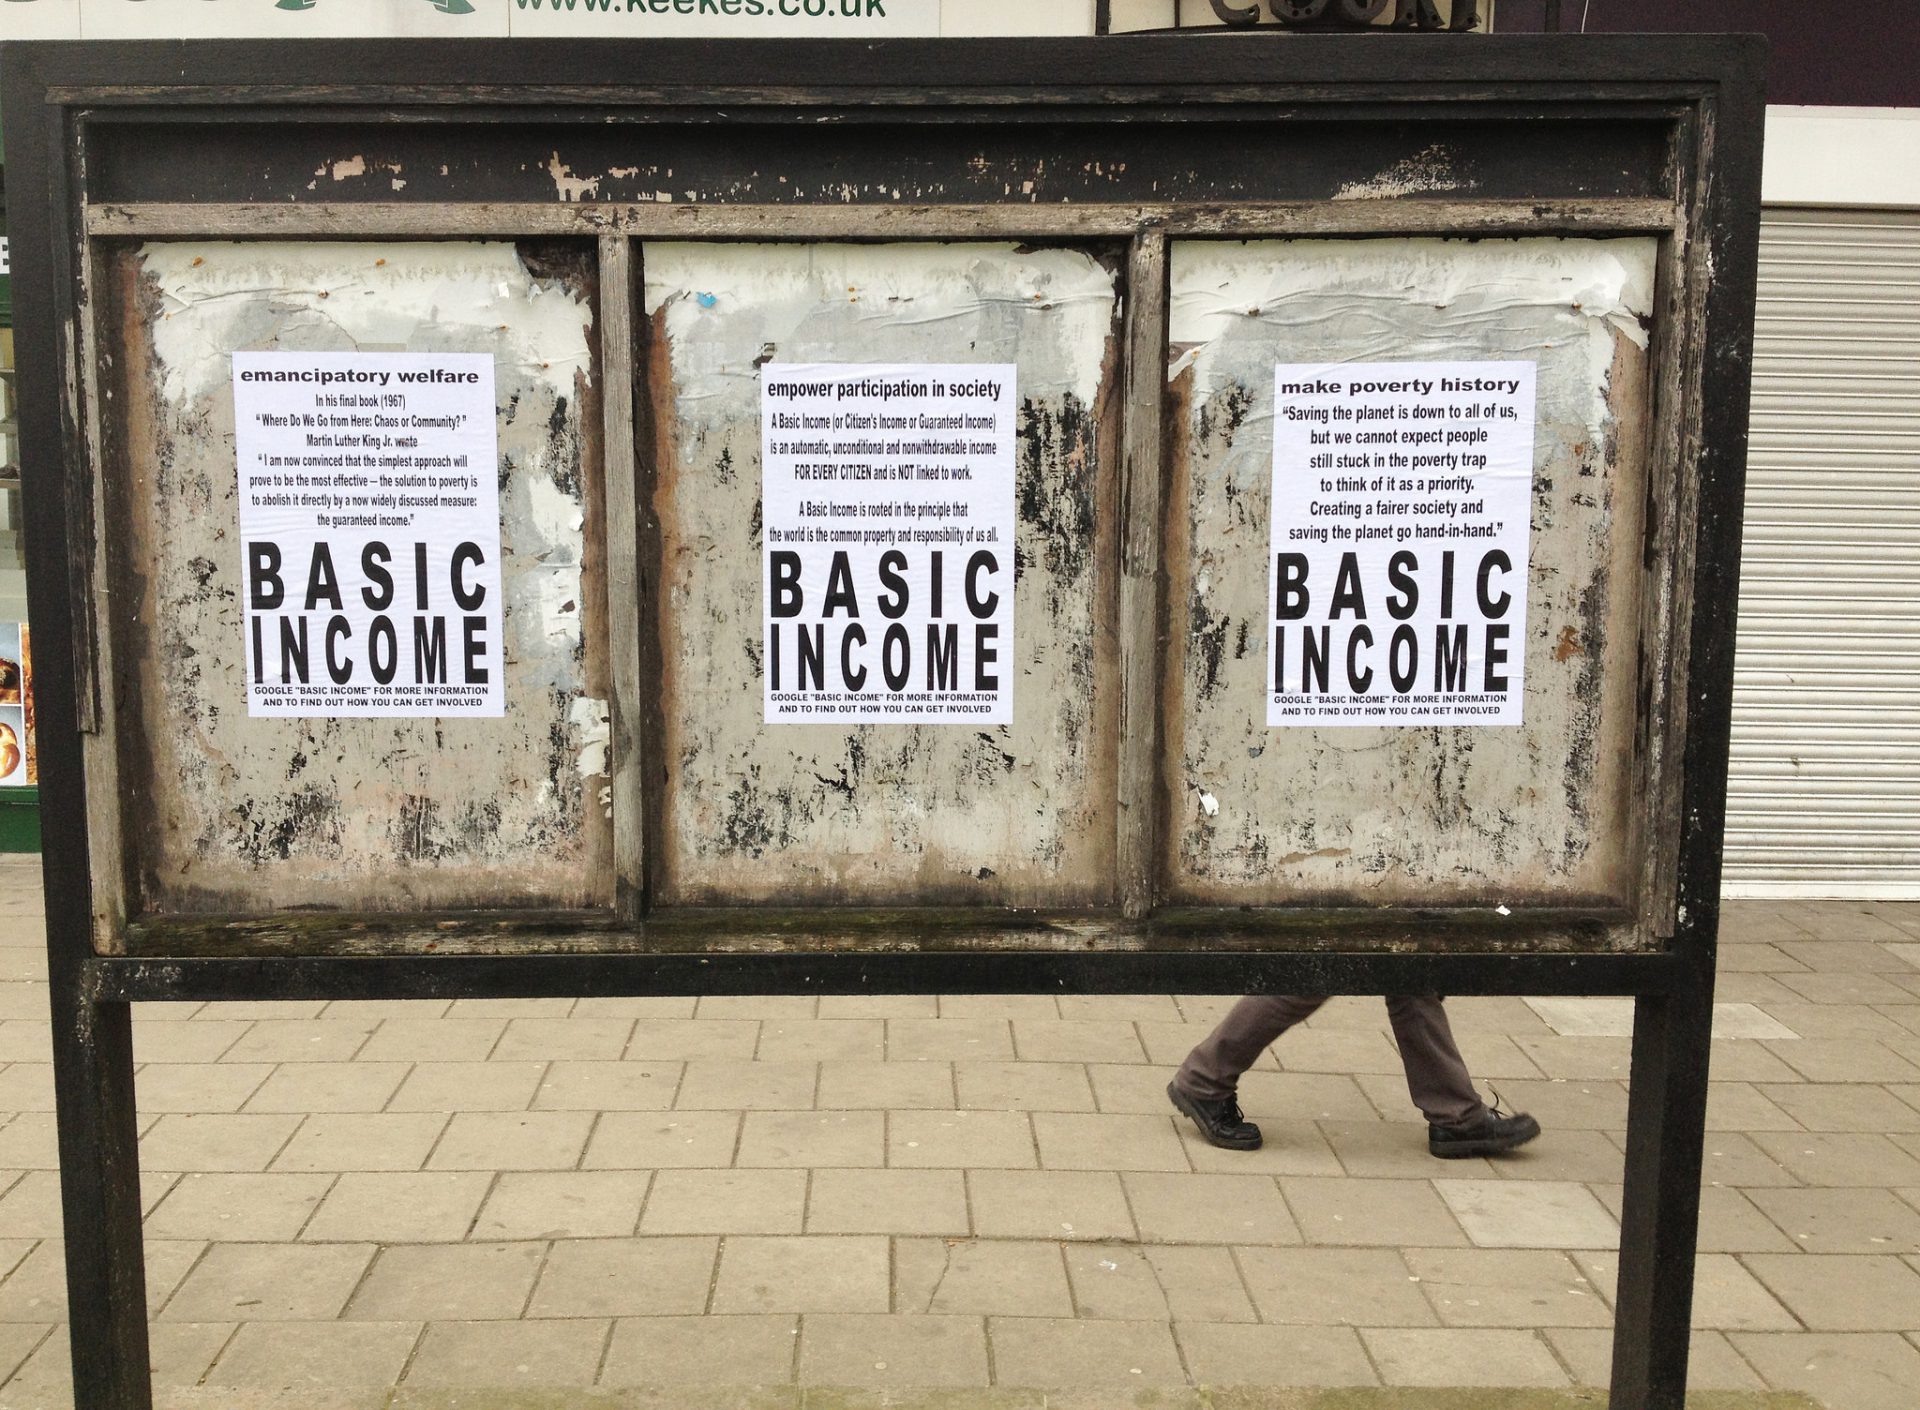 Getting to the heart of Universal Basic Income